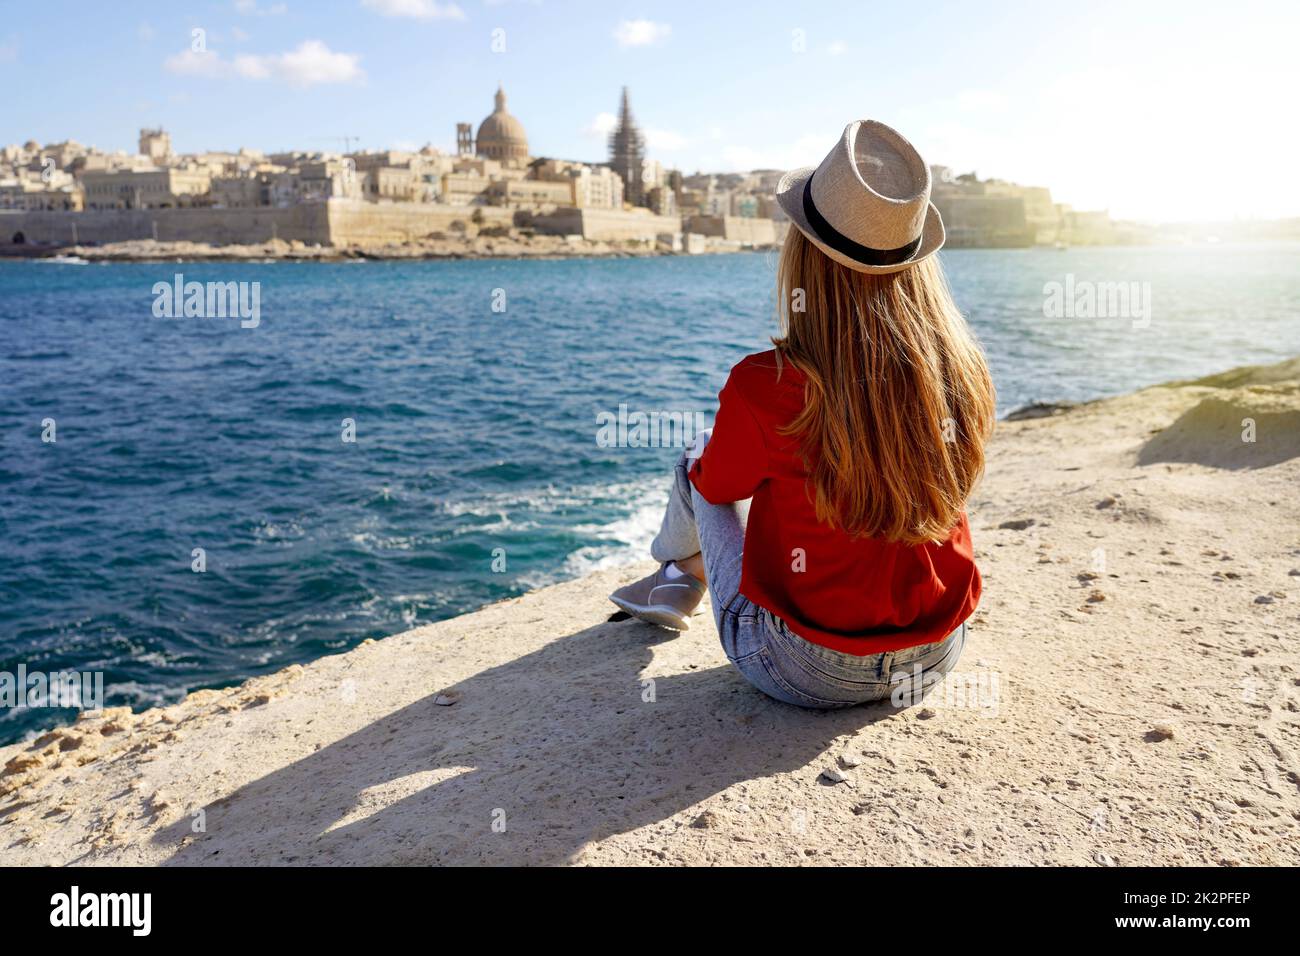 Girl sits down on the edge of the sea enjoying amazing landscape of Valletta, Malta. Travel concept with independent people doing outdoor leisure activity and wanderlust life. Stock Photo